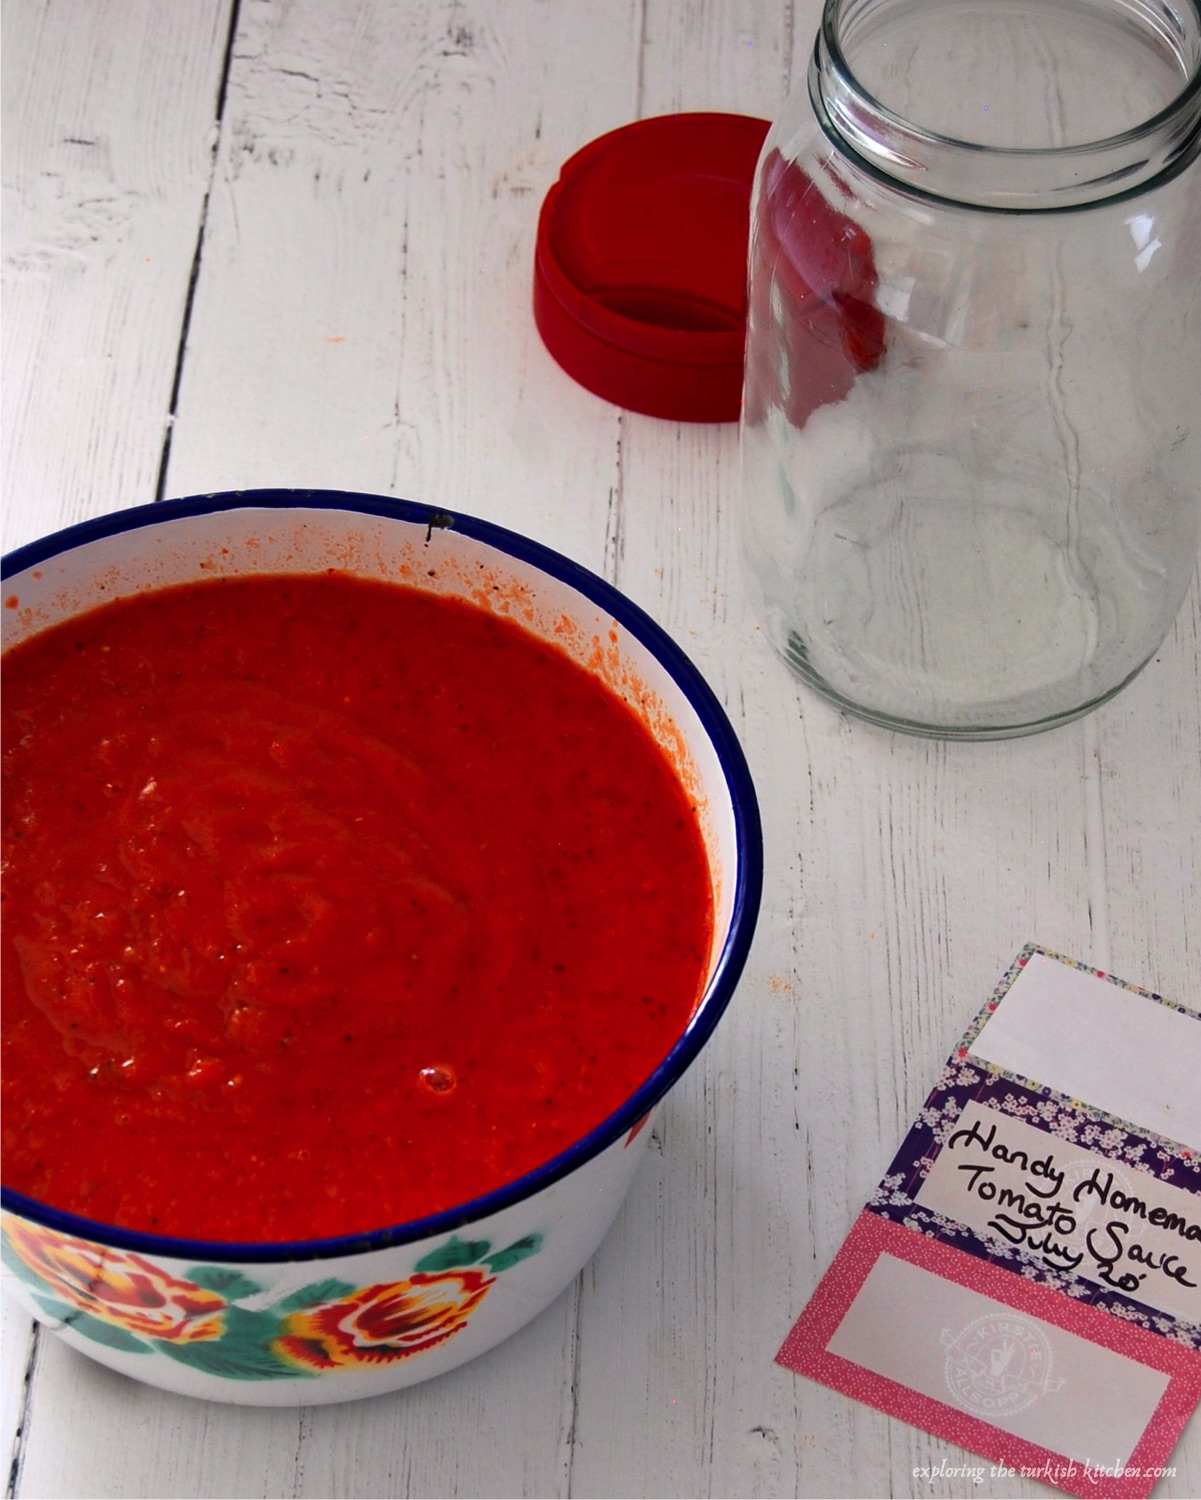 Rose tomato sauce in a large white bowl with jar and label reading: Handy Hommade Tomato Sauce